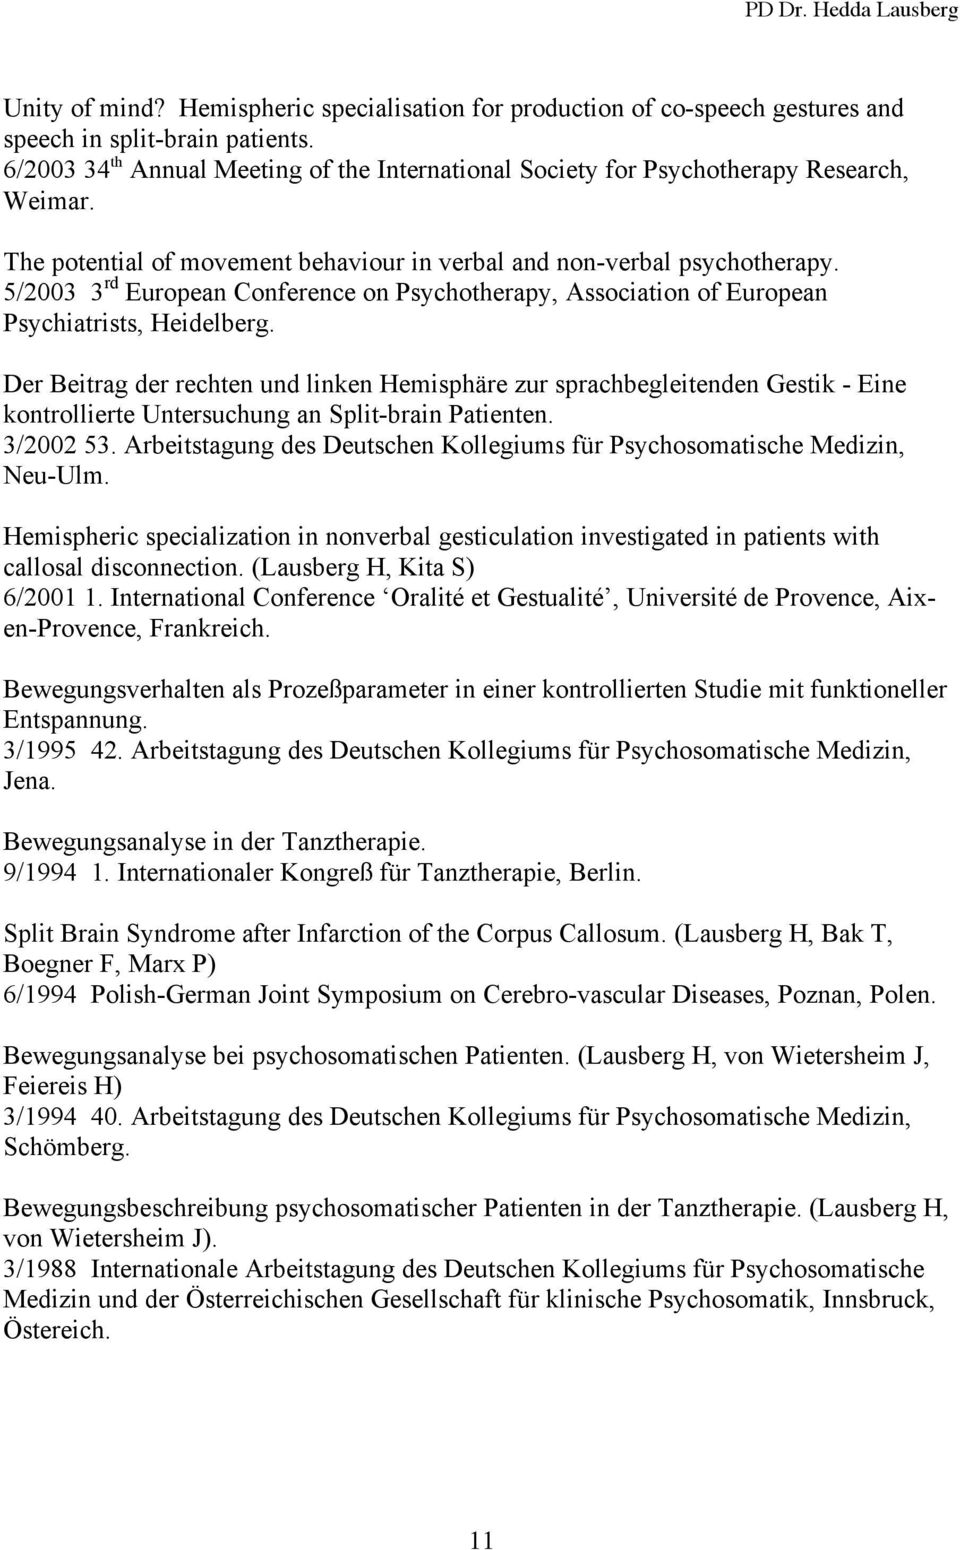 5/2003 3 rd European Conference on Psychotherapy, Association of European Psychiatrists, Heidelberg.